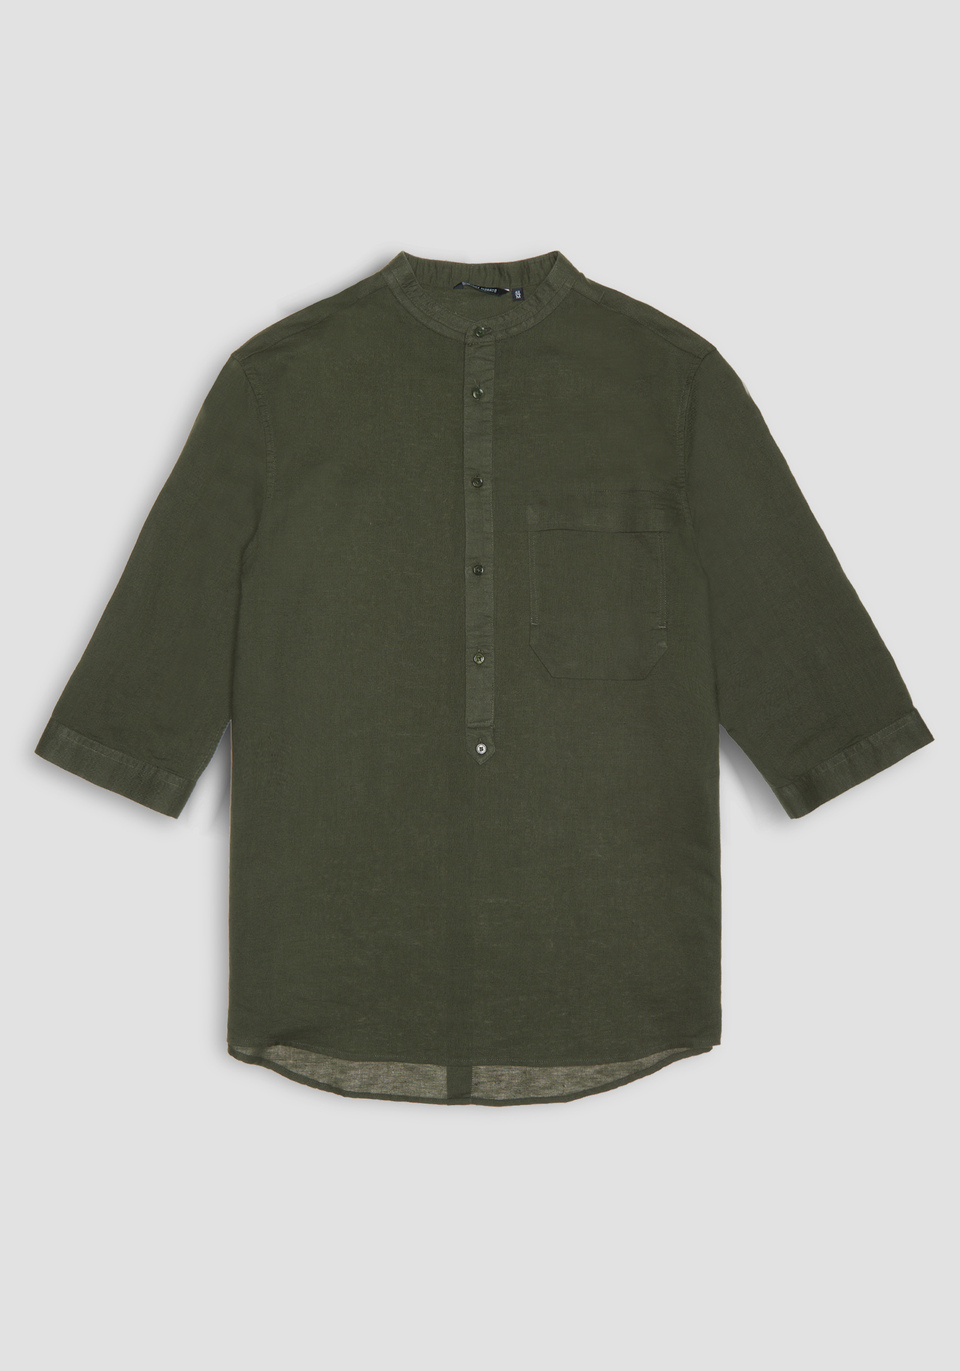 OVERSIZED SHIRT IN LINEN BLEND WITH THREE-QUARTER SLEEVES - Antony Morato Online Shop